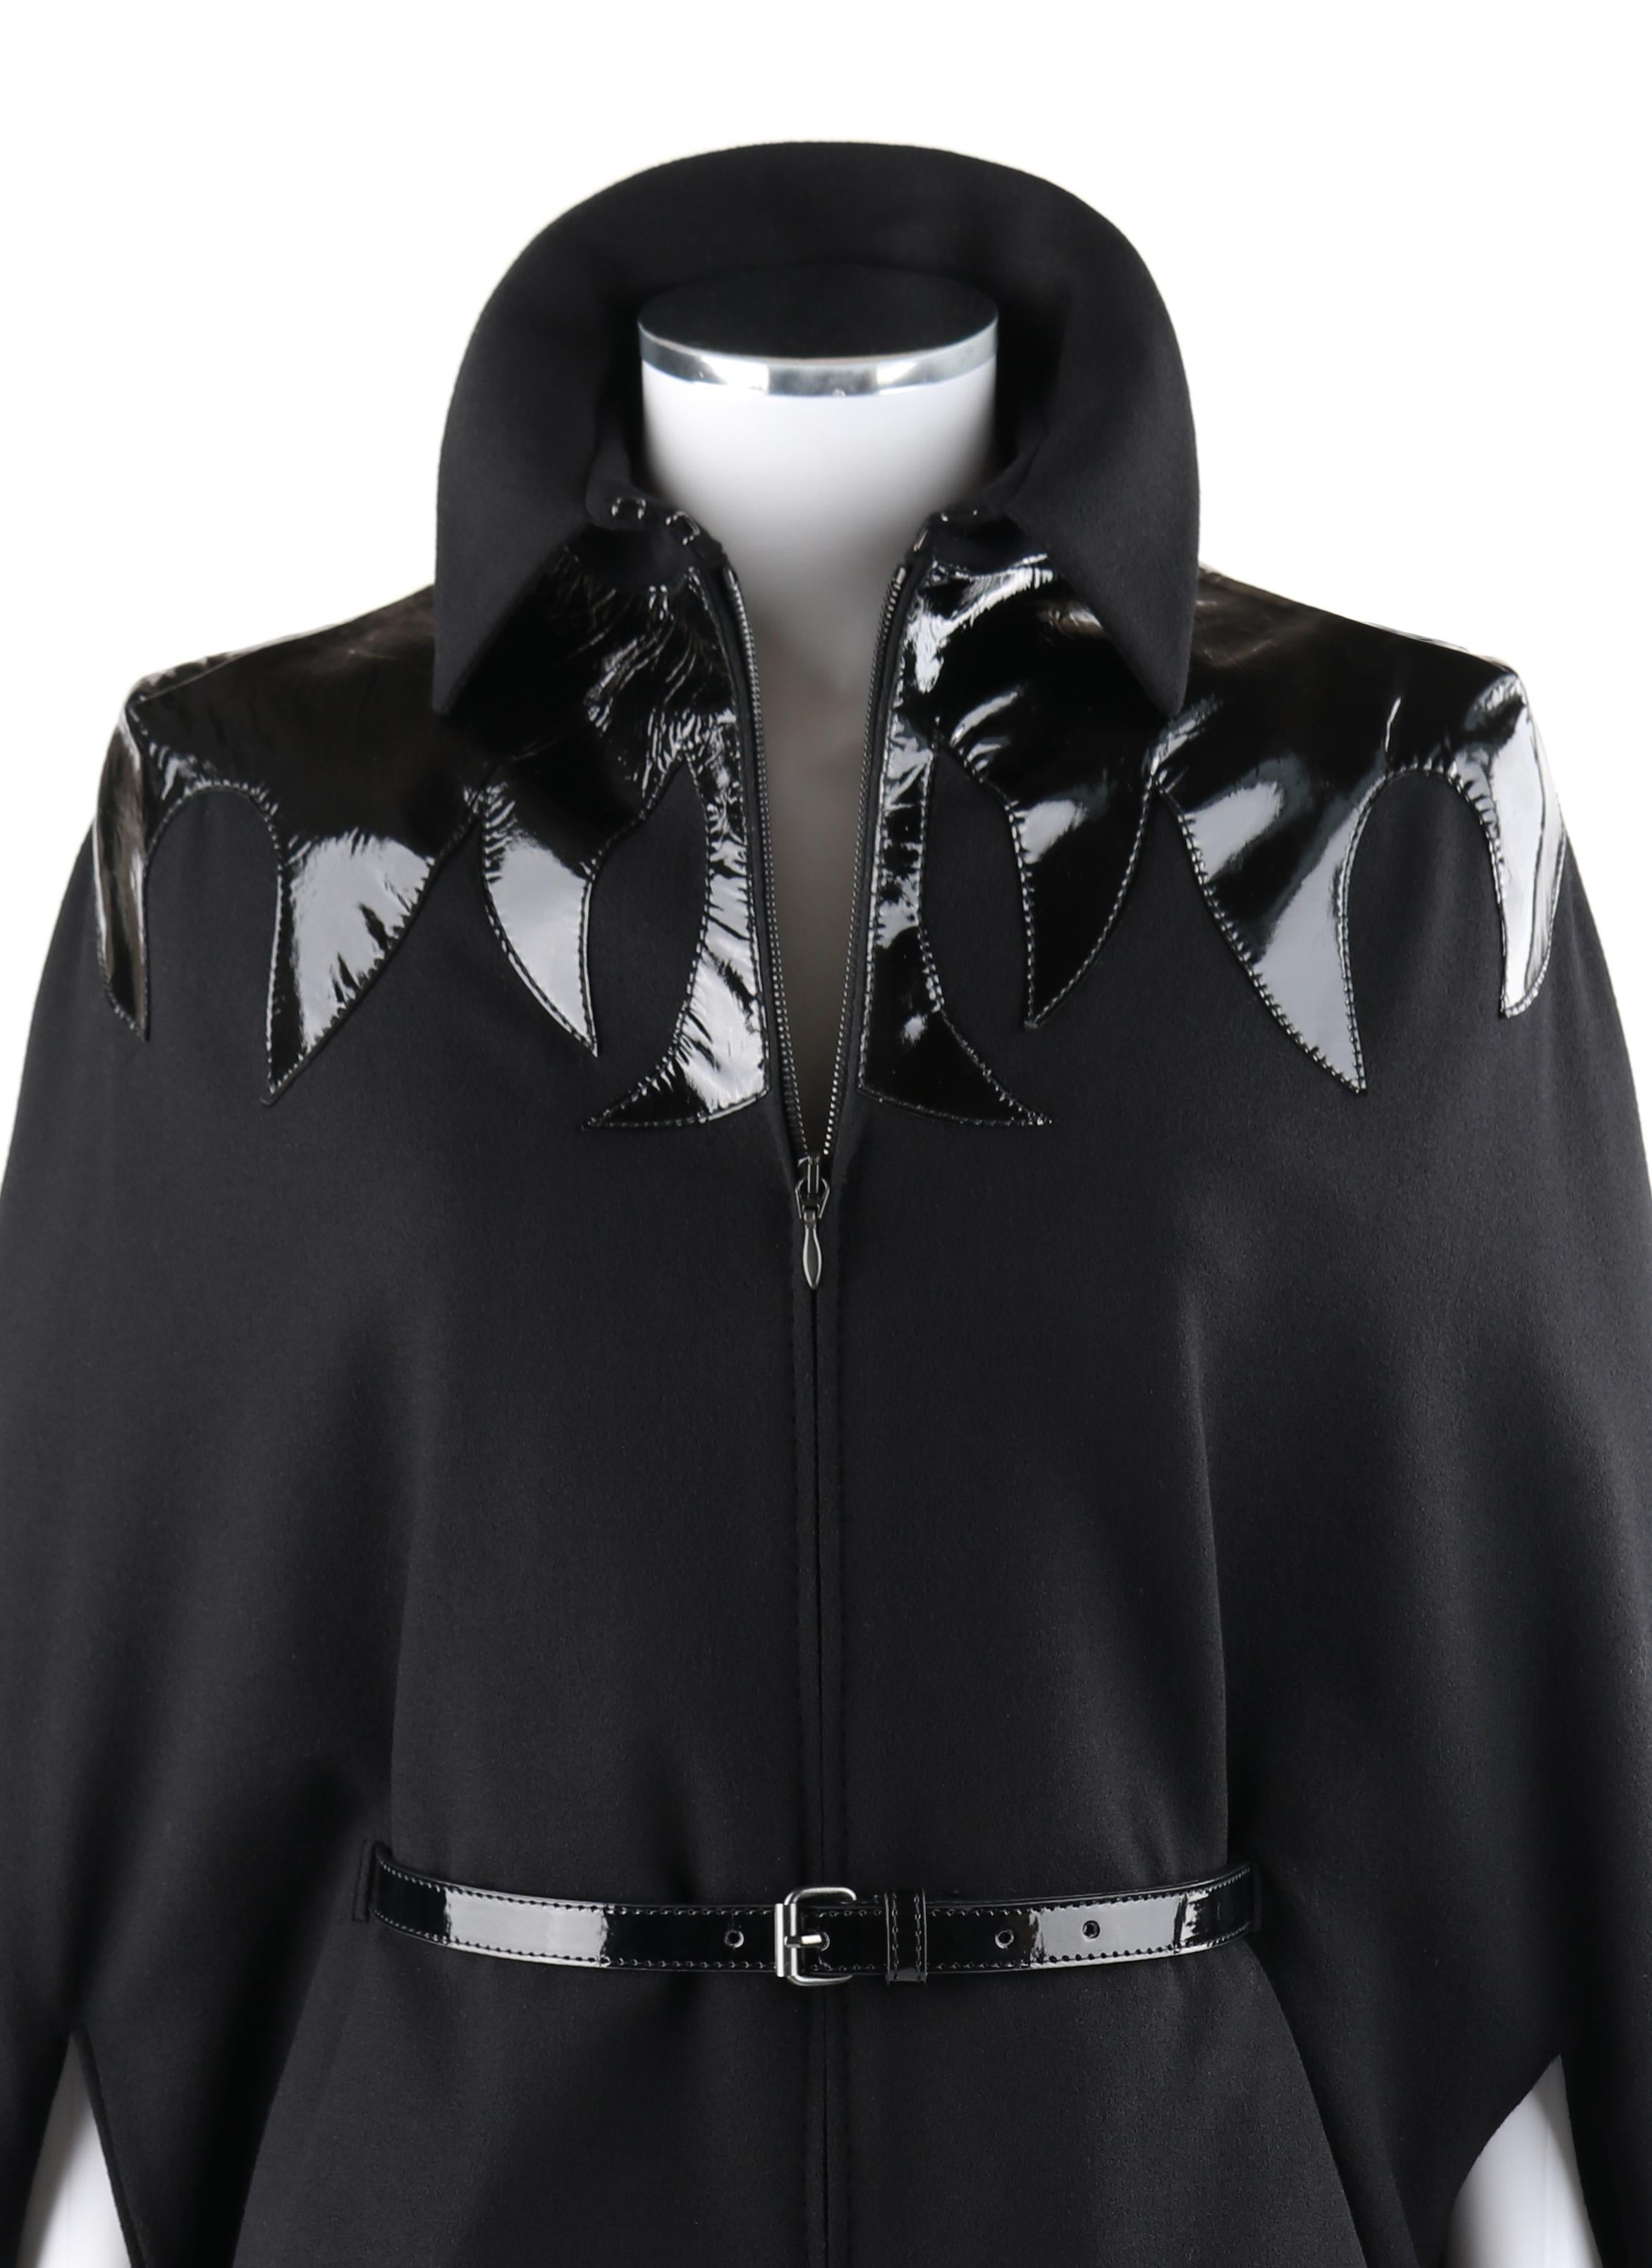 ALEXANDER McQUEEN A/W 2007 “Witches” Black Wool Patent Leather Detail Cape Coat

Brand / Manufacturer: Alexander McQueen 
Collection: A/W 2007 “Witches”
Designer: Alexander McQueen
Style: Mantel cape coat
Color(s): Black
Lined: Yes
Marked Fabric